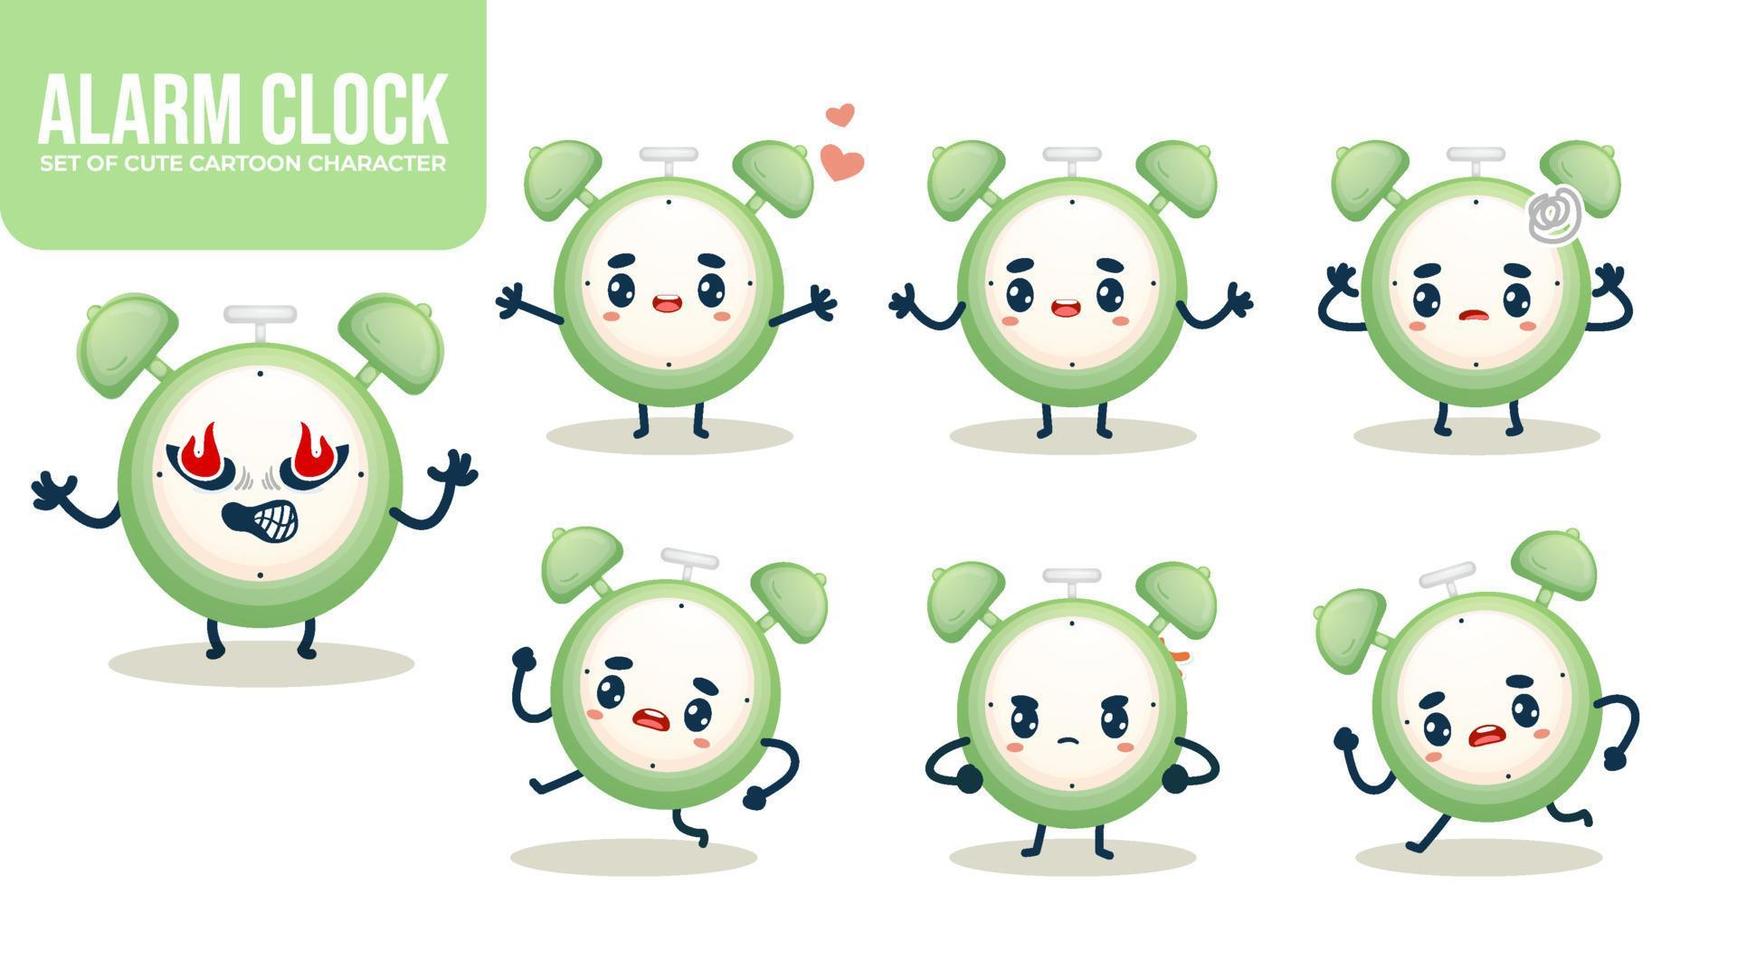 Set of cute alarm clock cartoon character with different poses Premium Vector